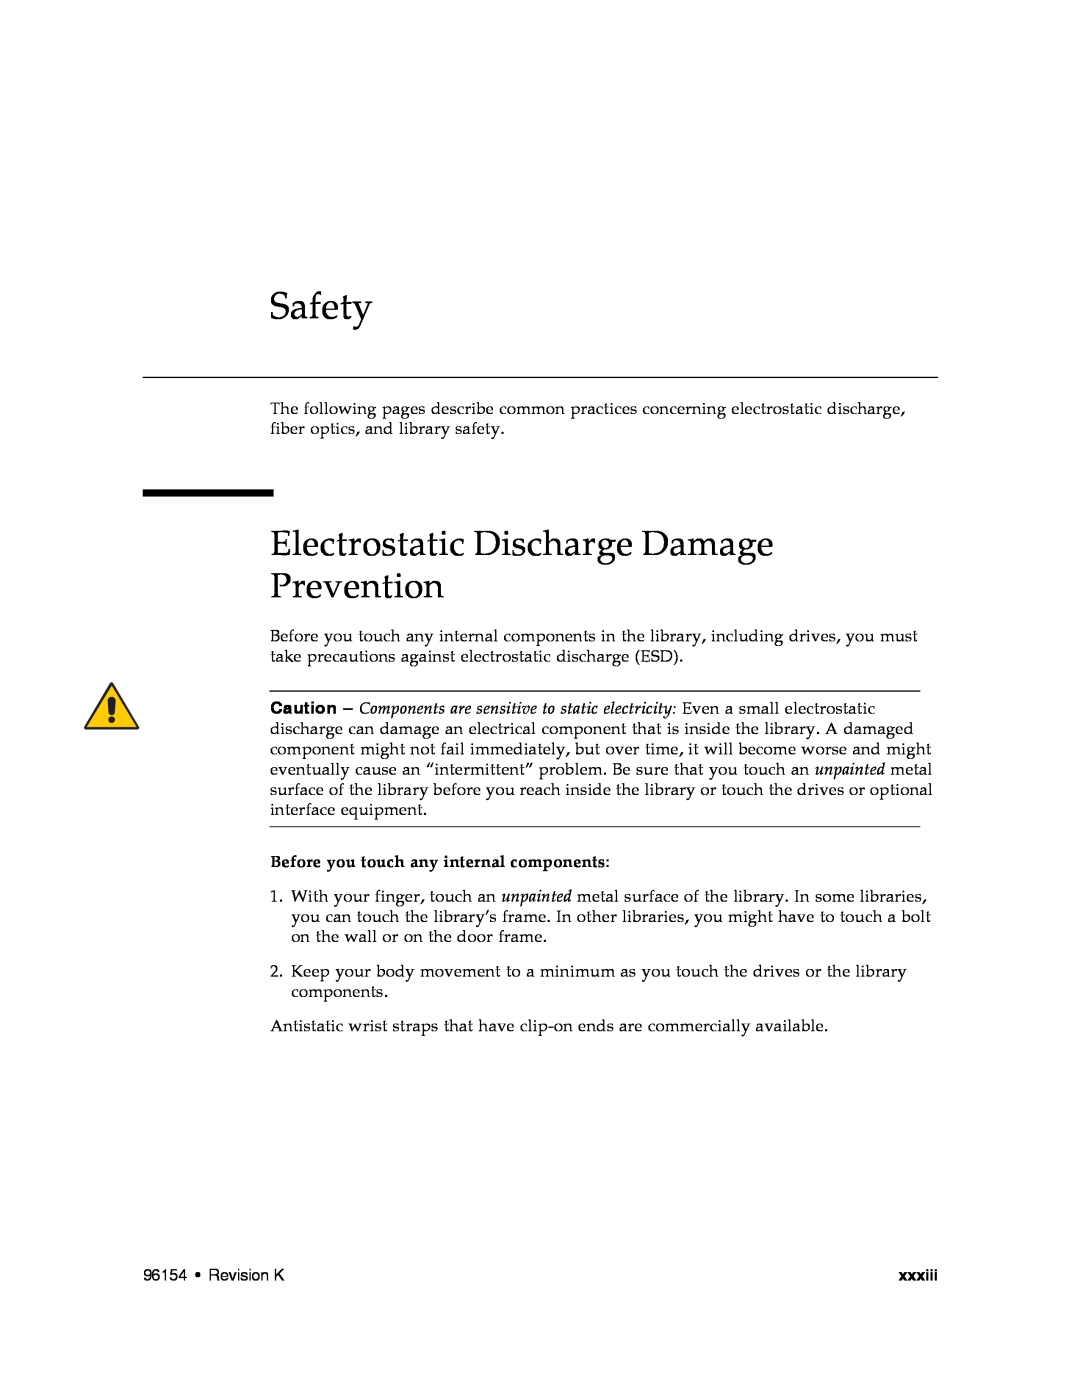 Sun Microsystems SL8500 manual Safety, Electrostatic Discharge Damage Prevention 